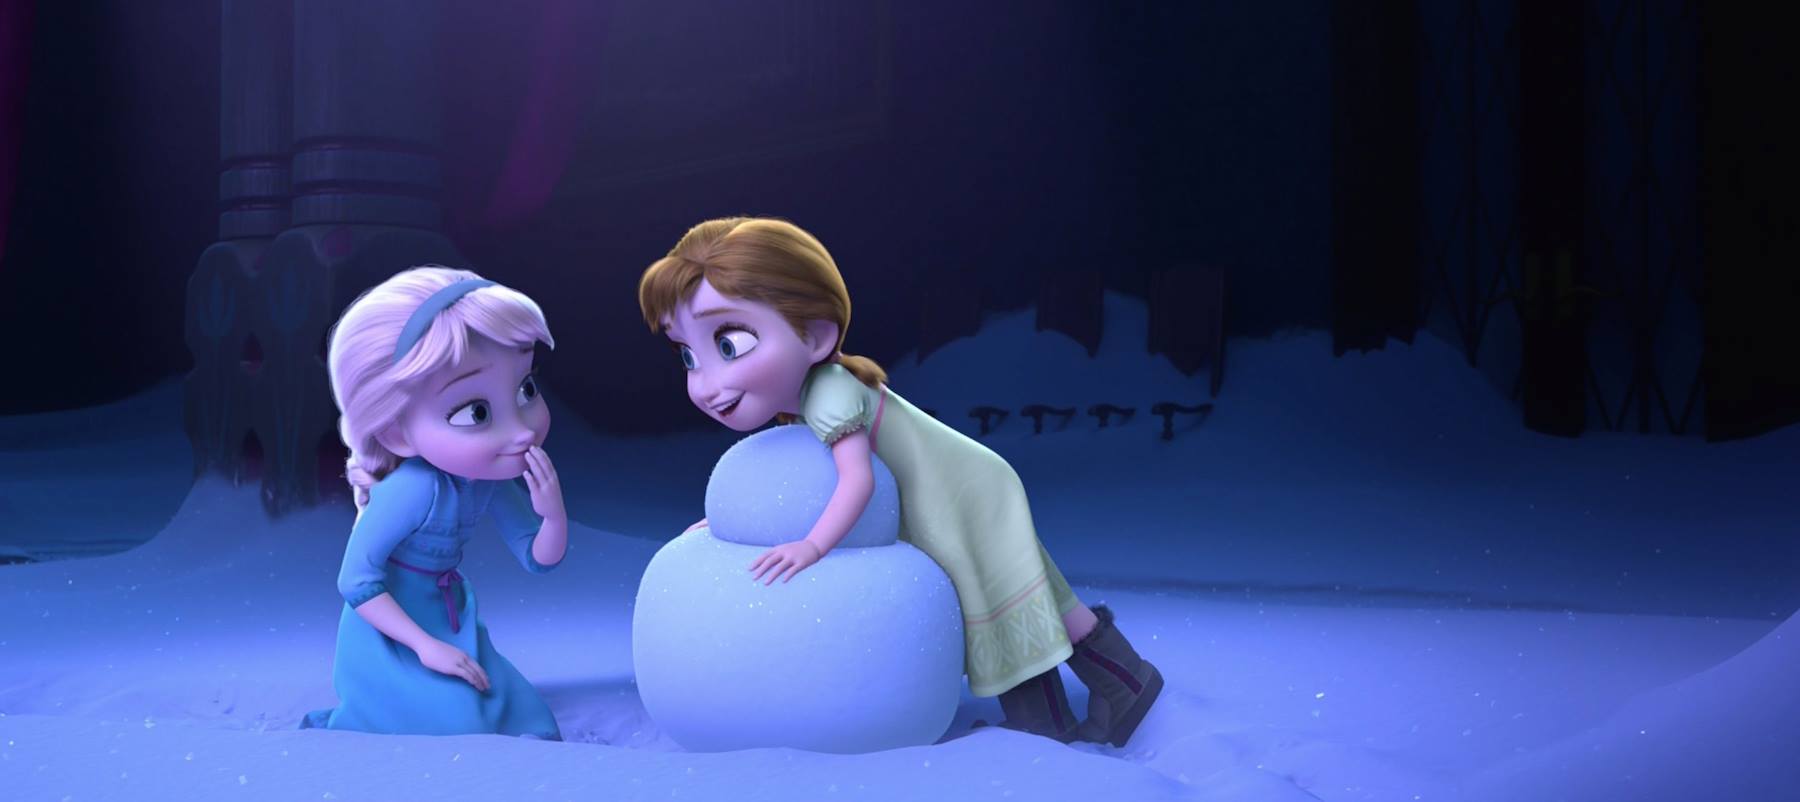 Frozen 2 Release Date Moved Up